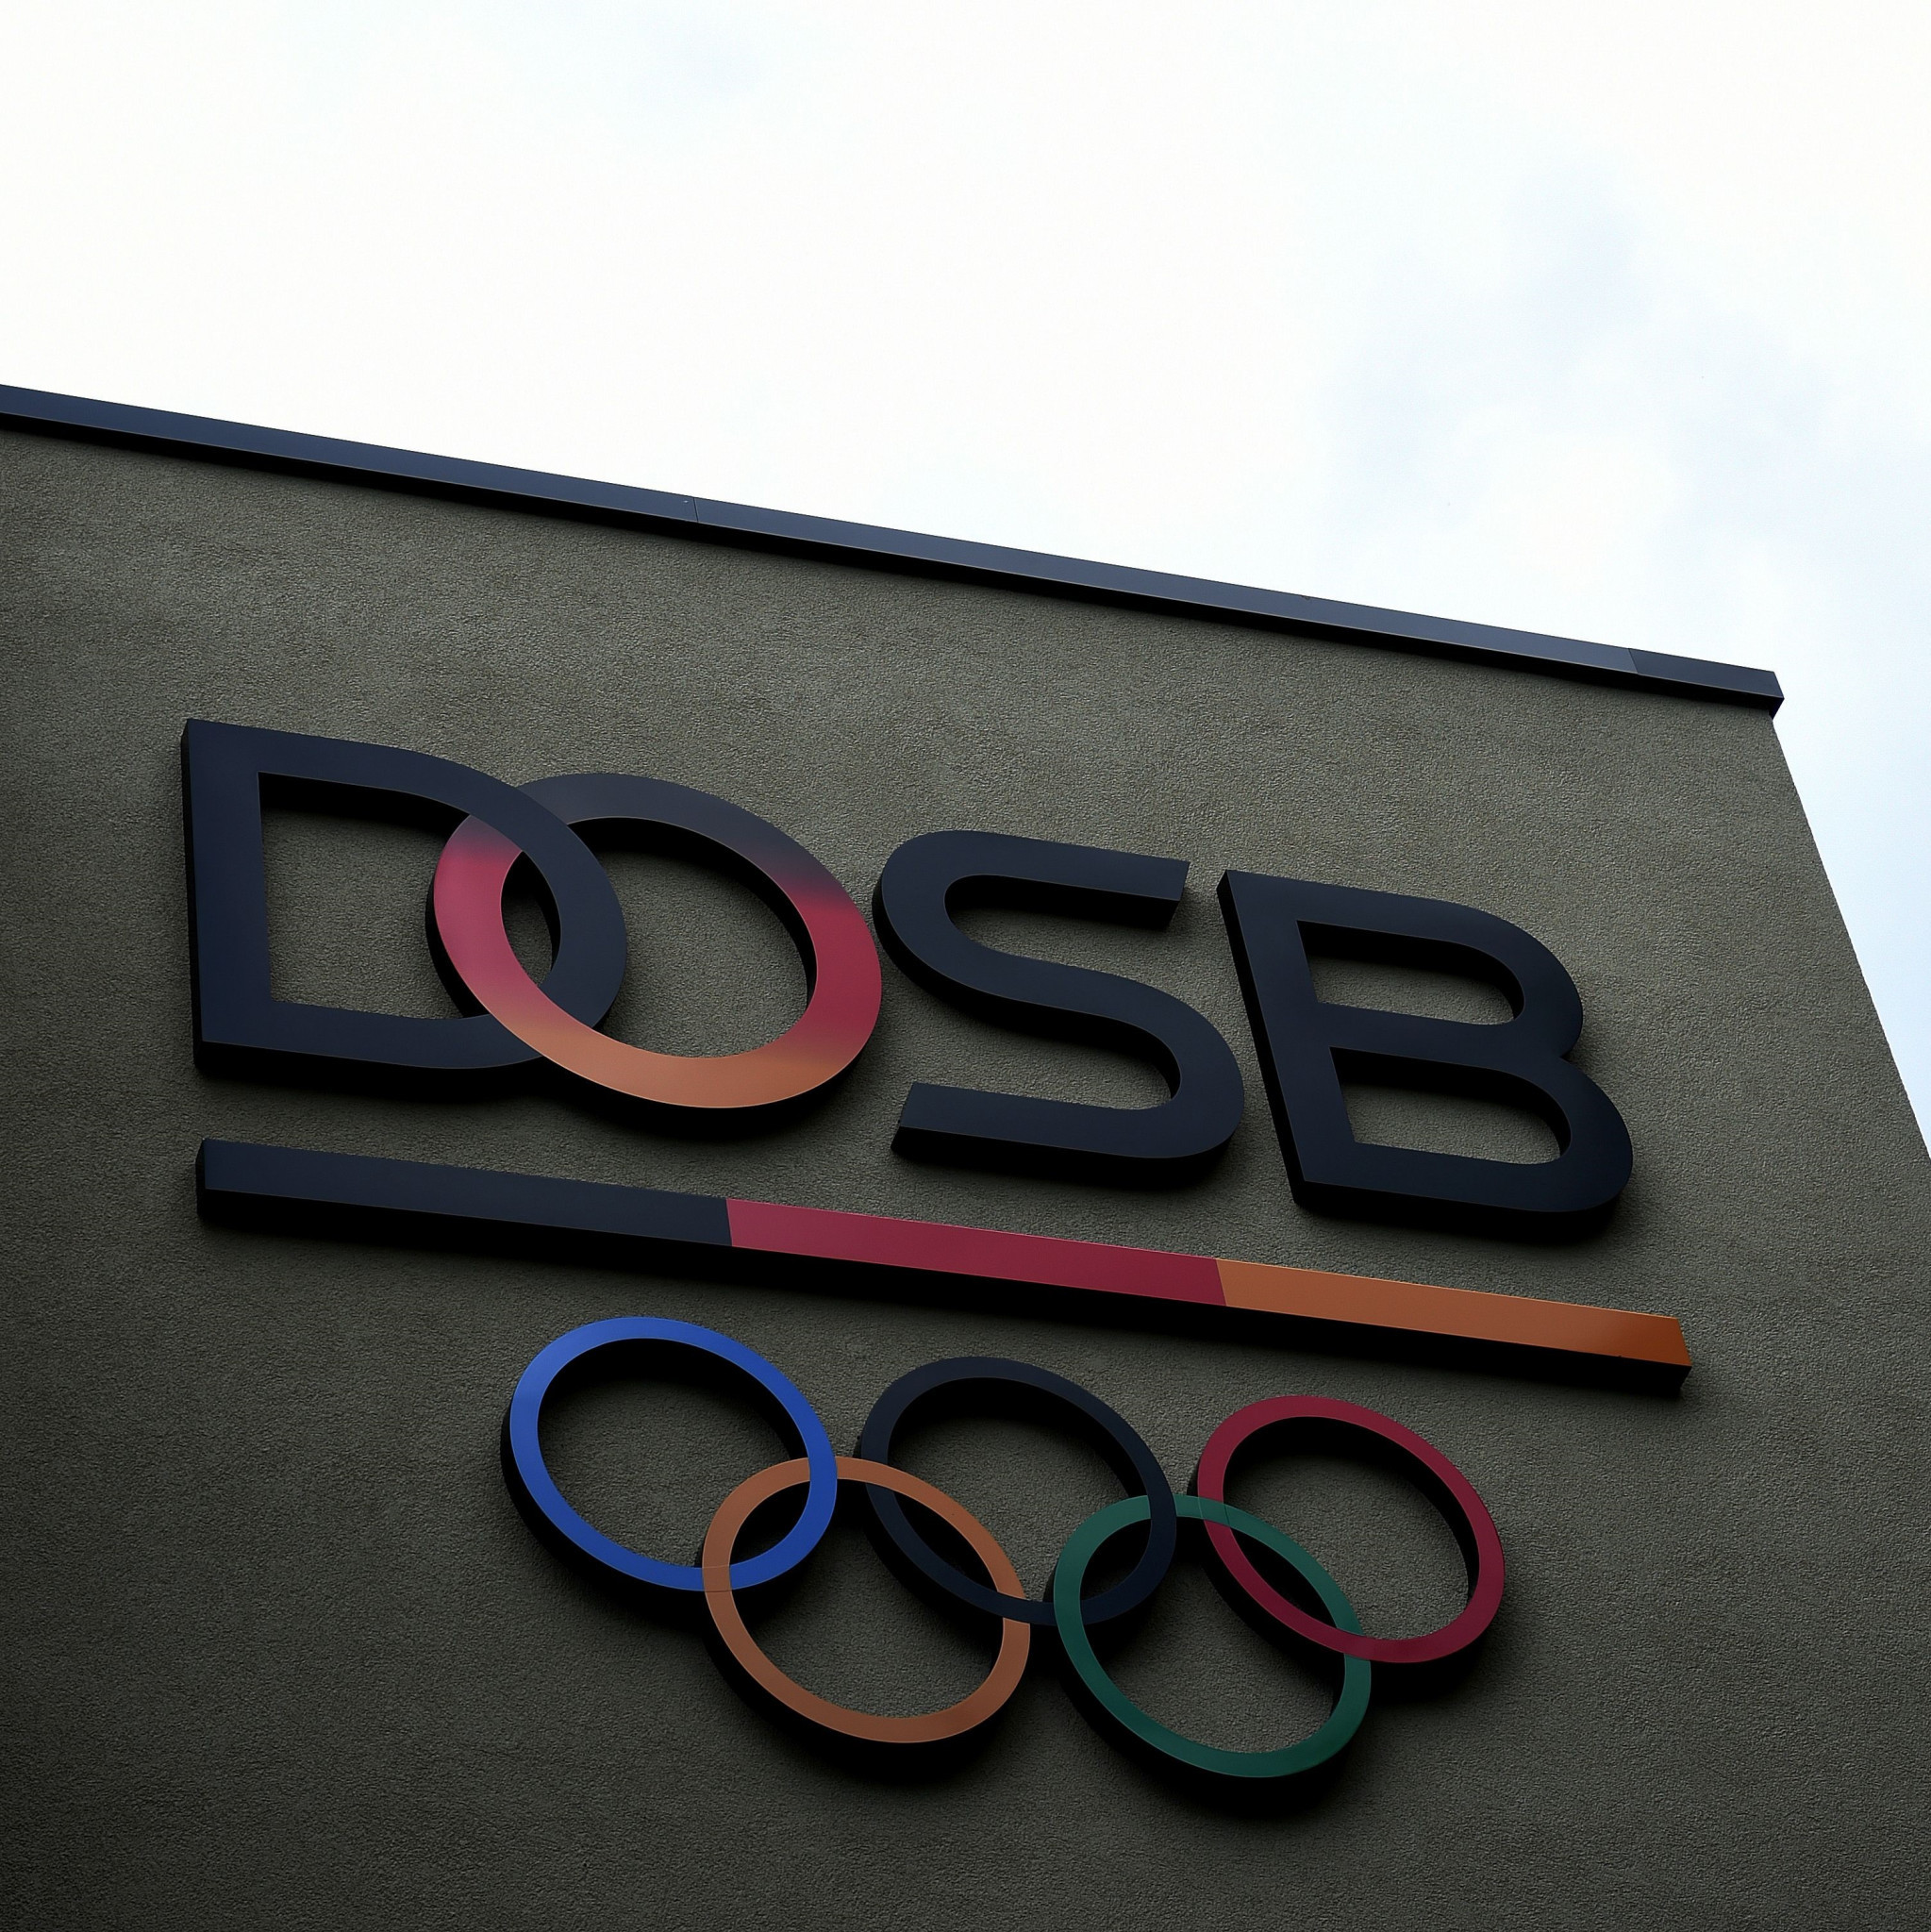 DOSB issues support package to clubs hit by flooding